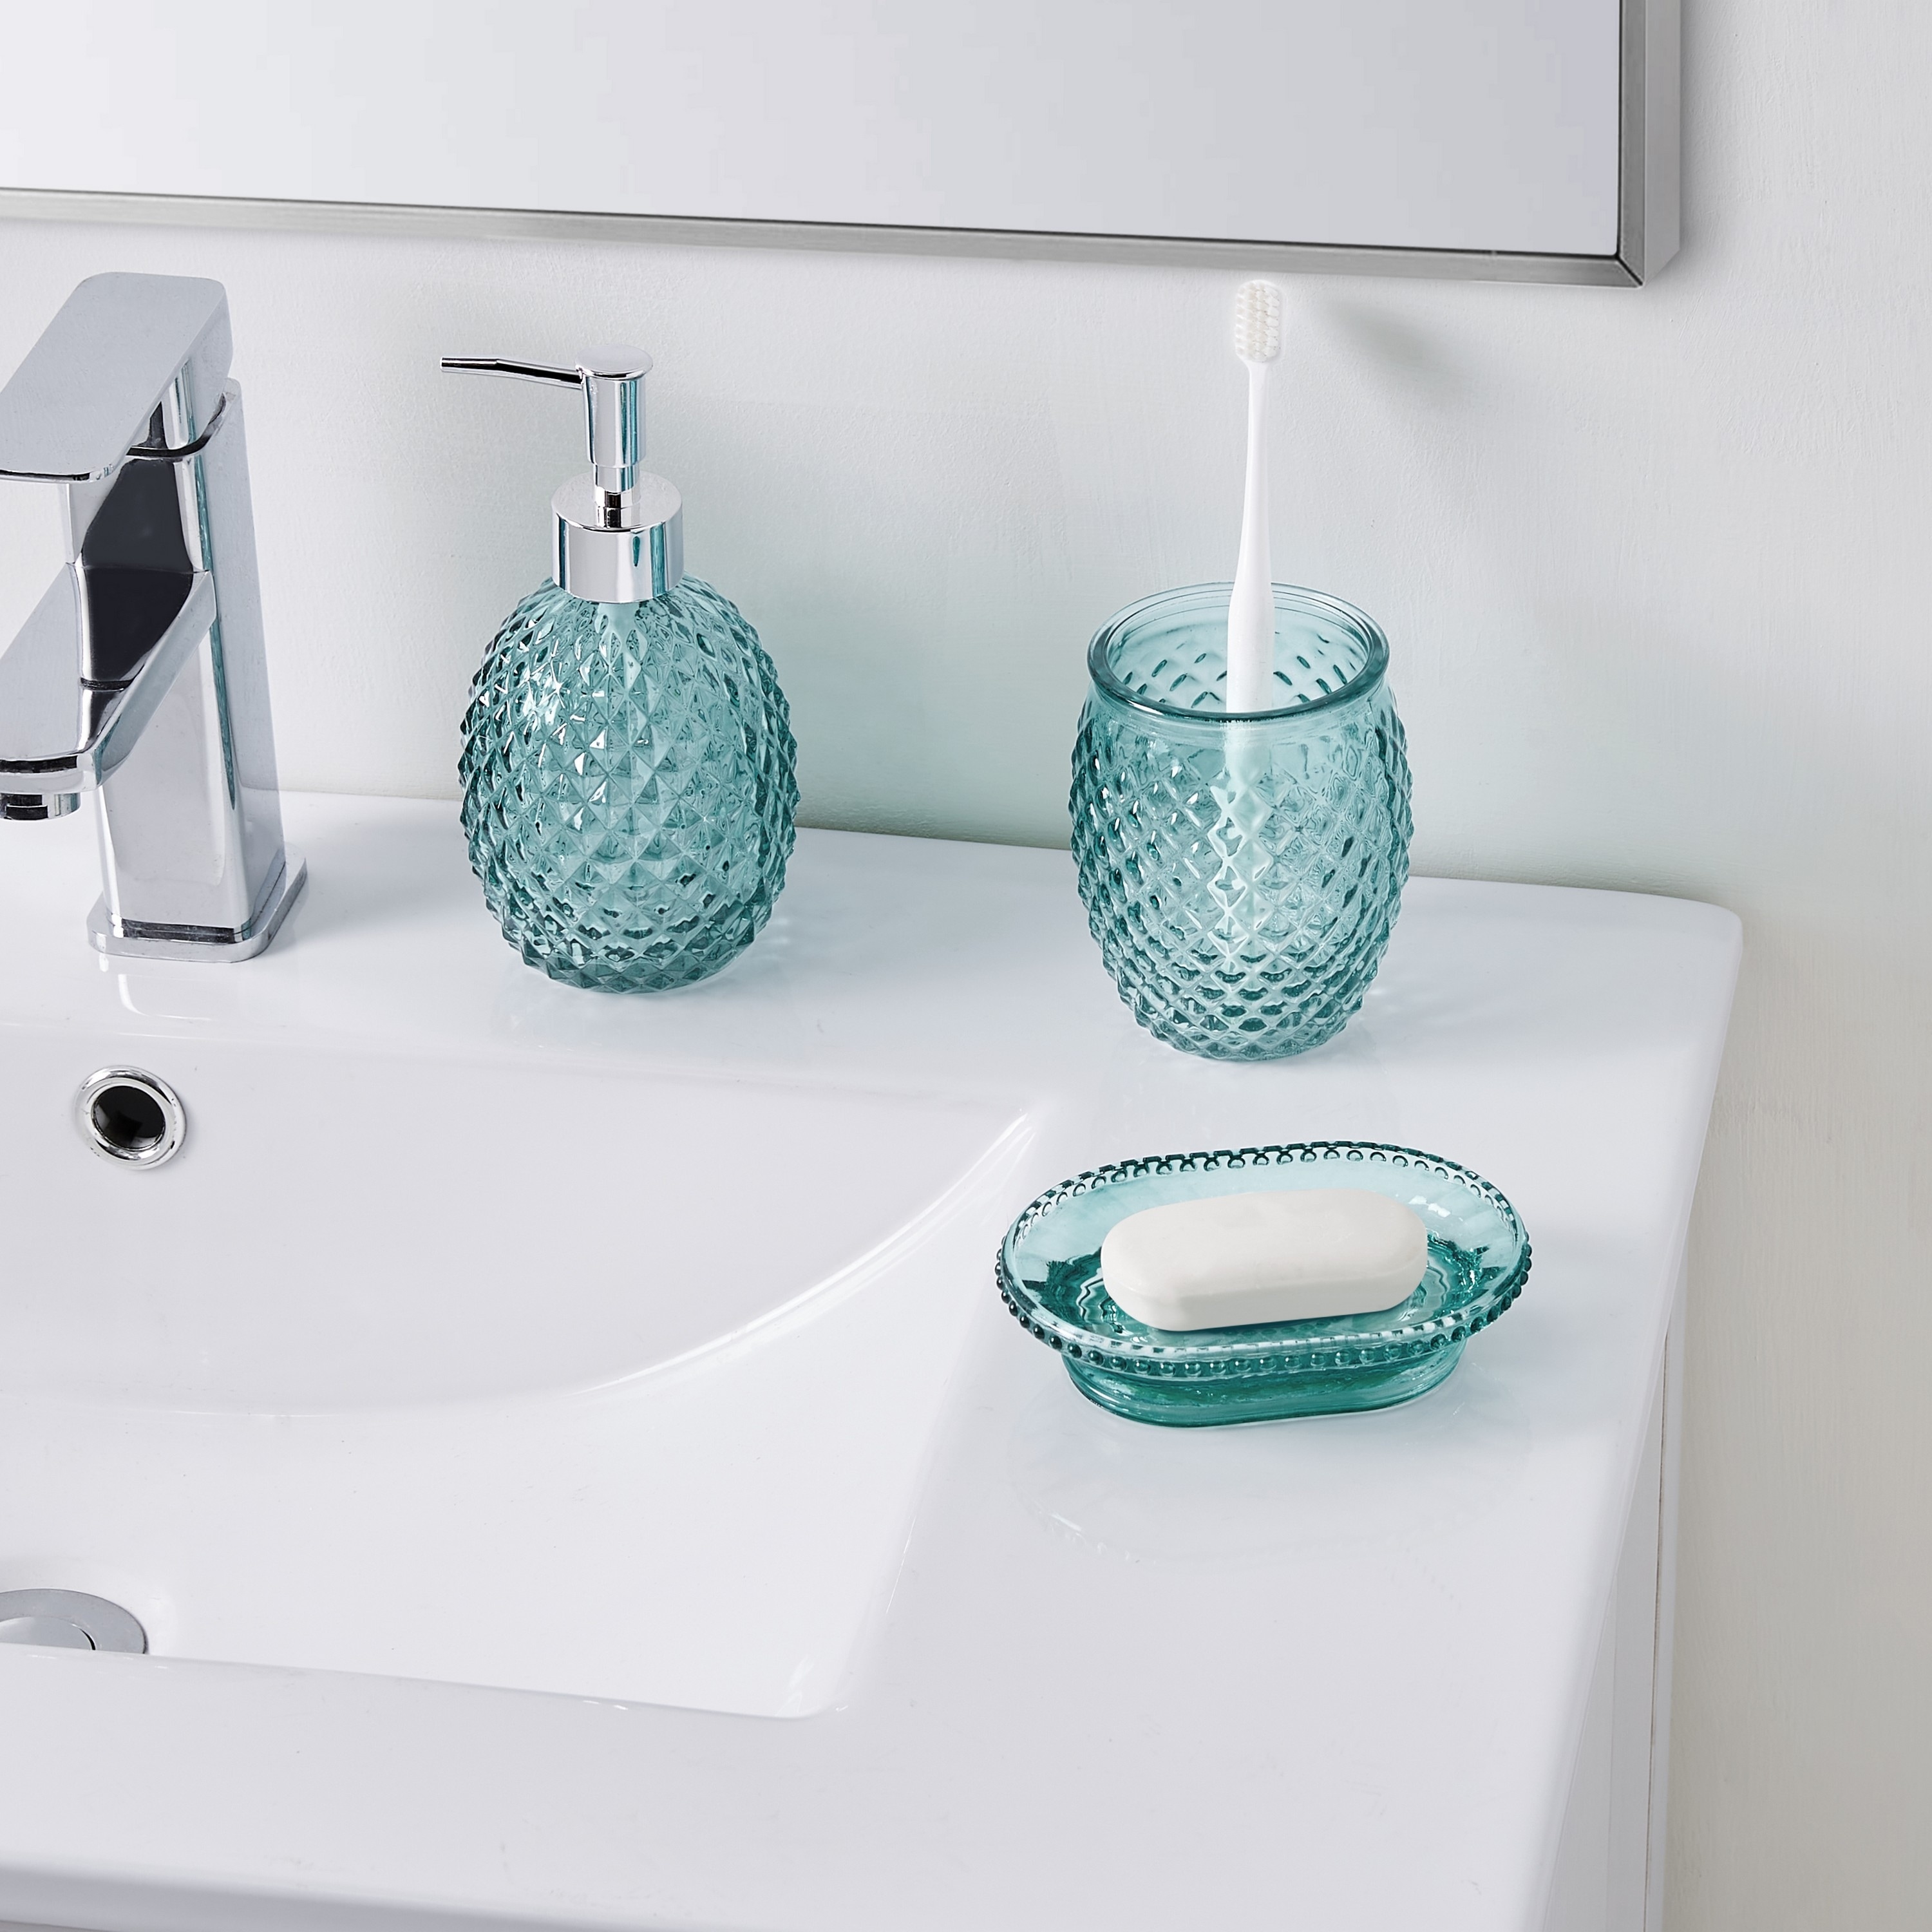 https://ak1.ostkcdn.com/images/products/is/images/direct/75b5e1ba1d60028e3e5eaf254e422ab980a11ea9/VCNY-Home-Aqua-Pin-Glass-Bath-Accessories-Set%2C-3-Pieces.jpg